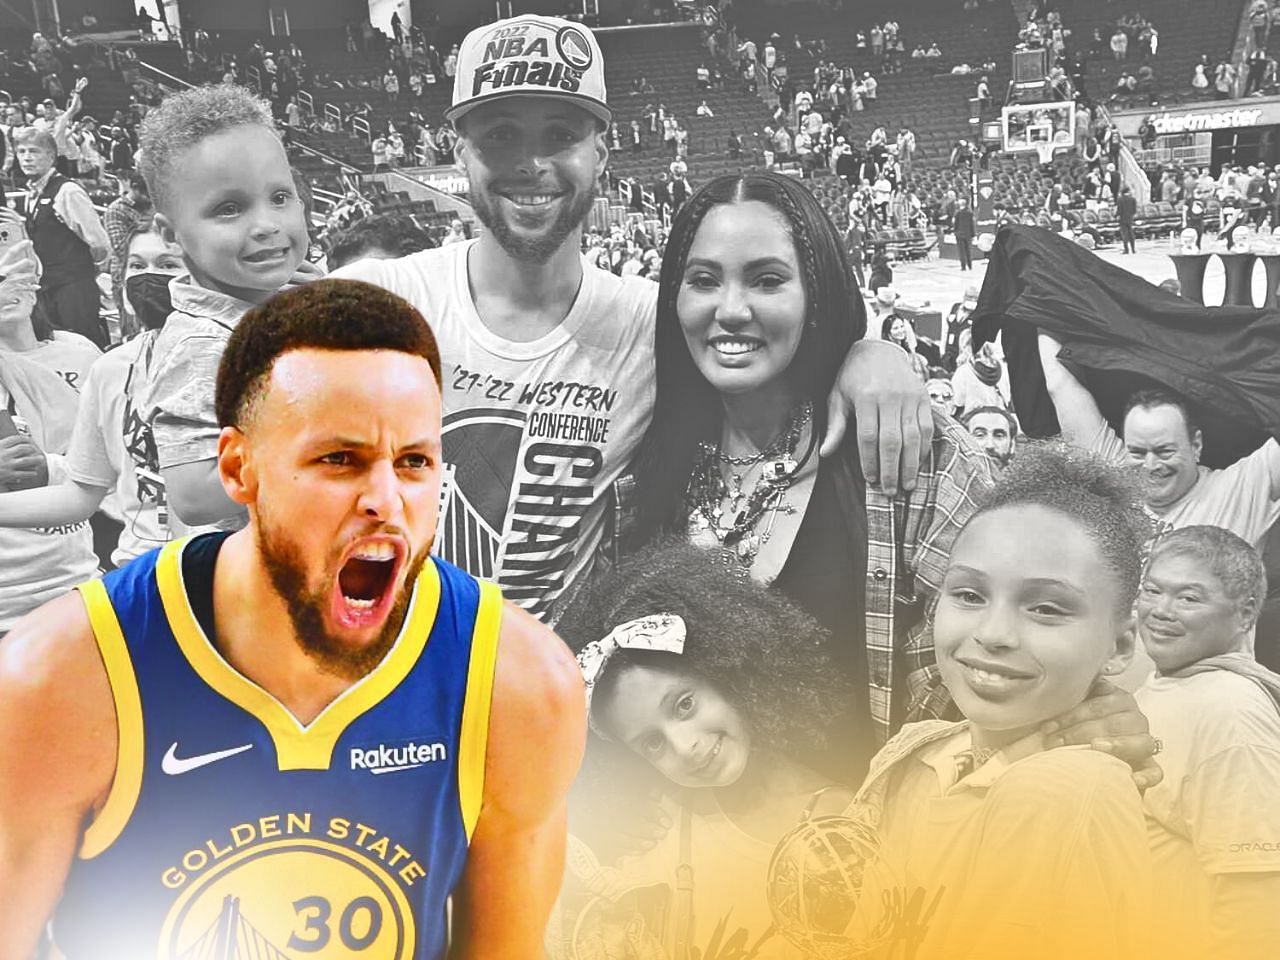 Steph Curry discusses his mindset, and how he wants to pass it along to his kids